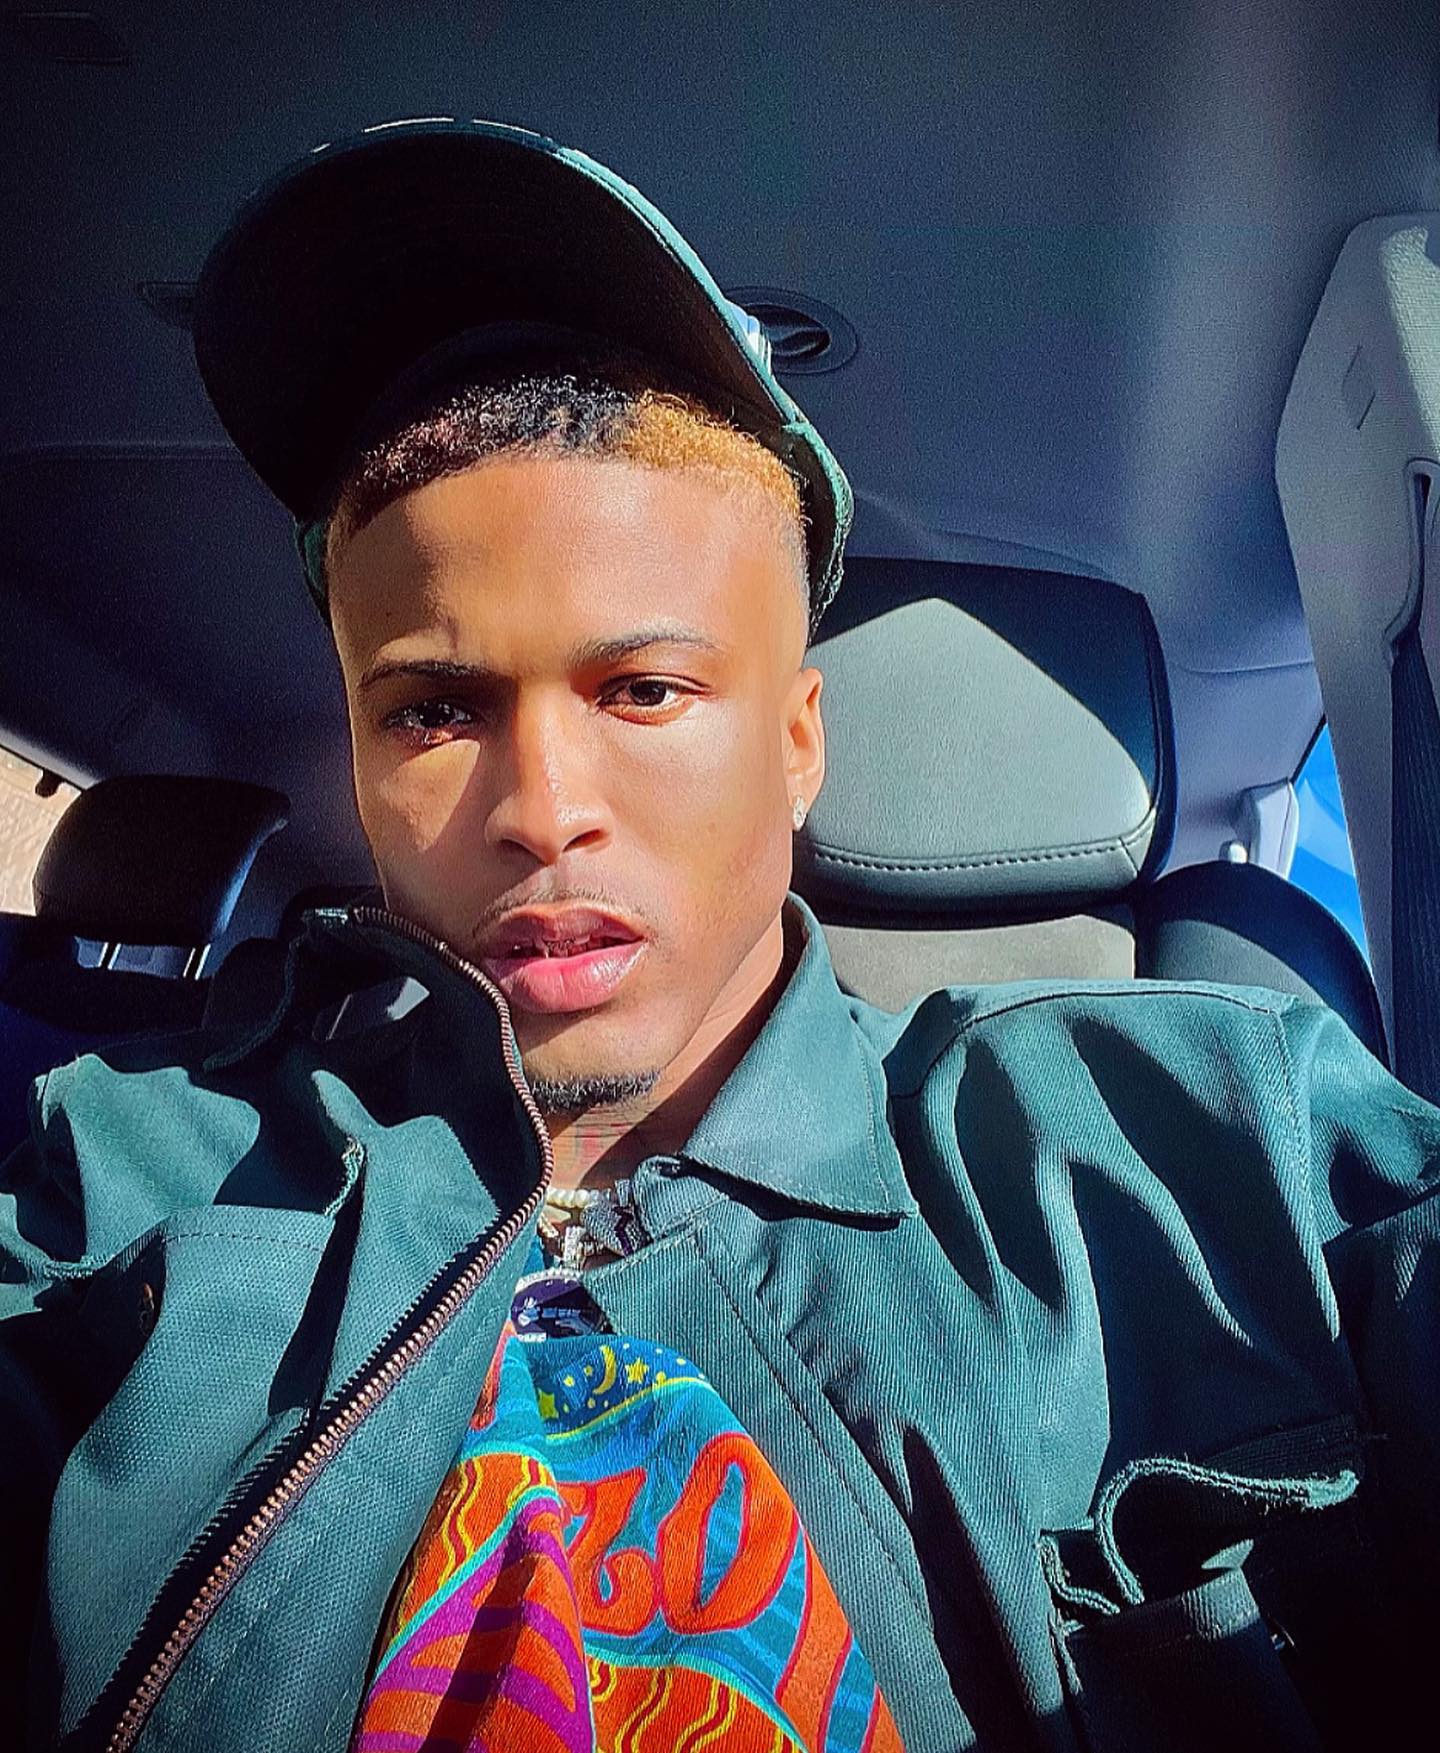 August Alsina age, height, net worth, illness, Instagram, songs and